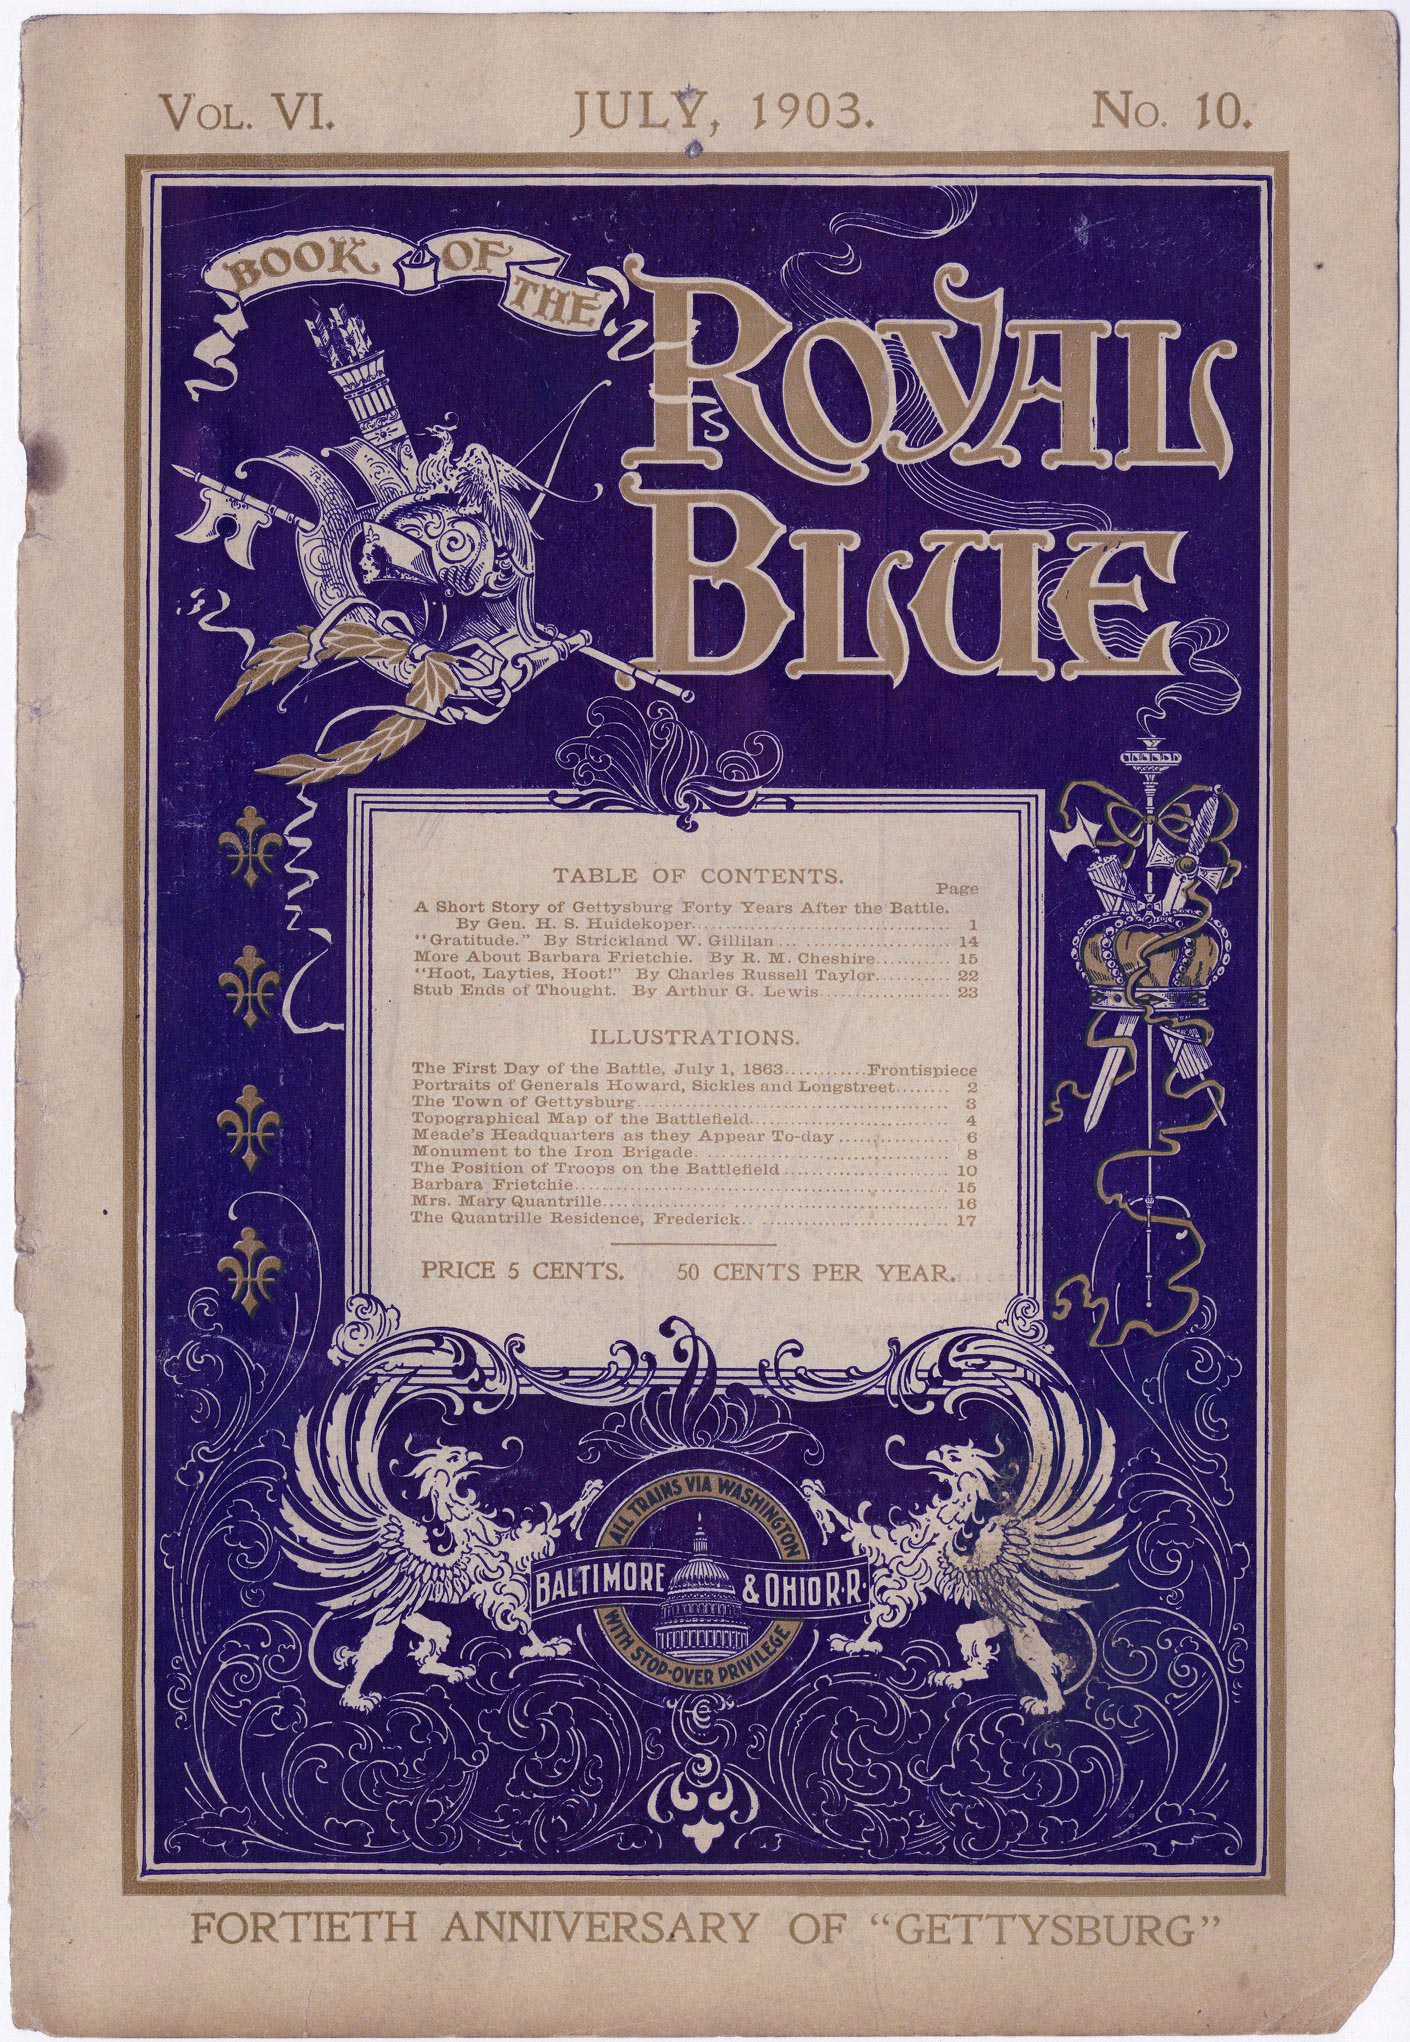 Battle of Gettysburg, 40th anniversary issue of the Book of the Royal Blue, July 1903